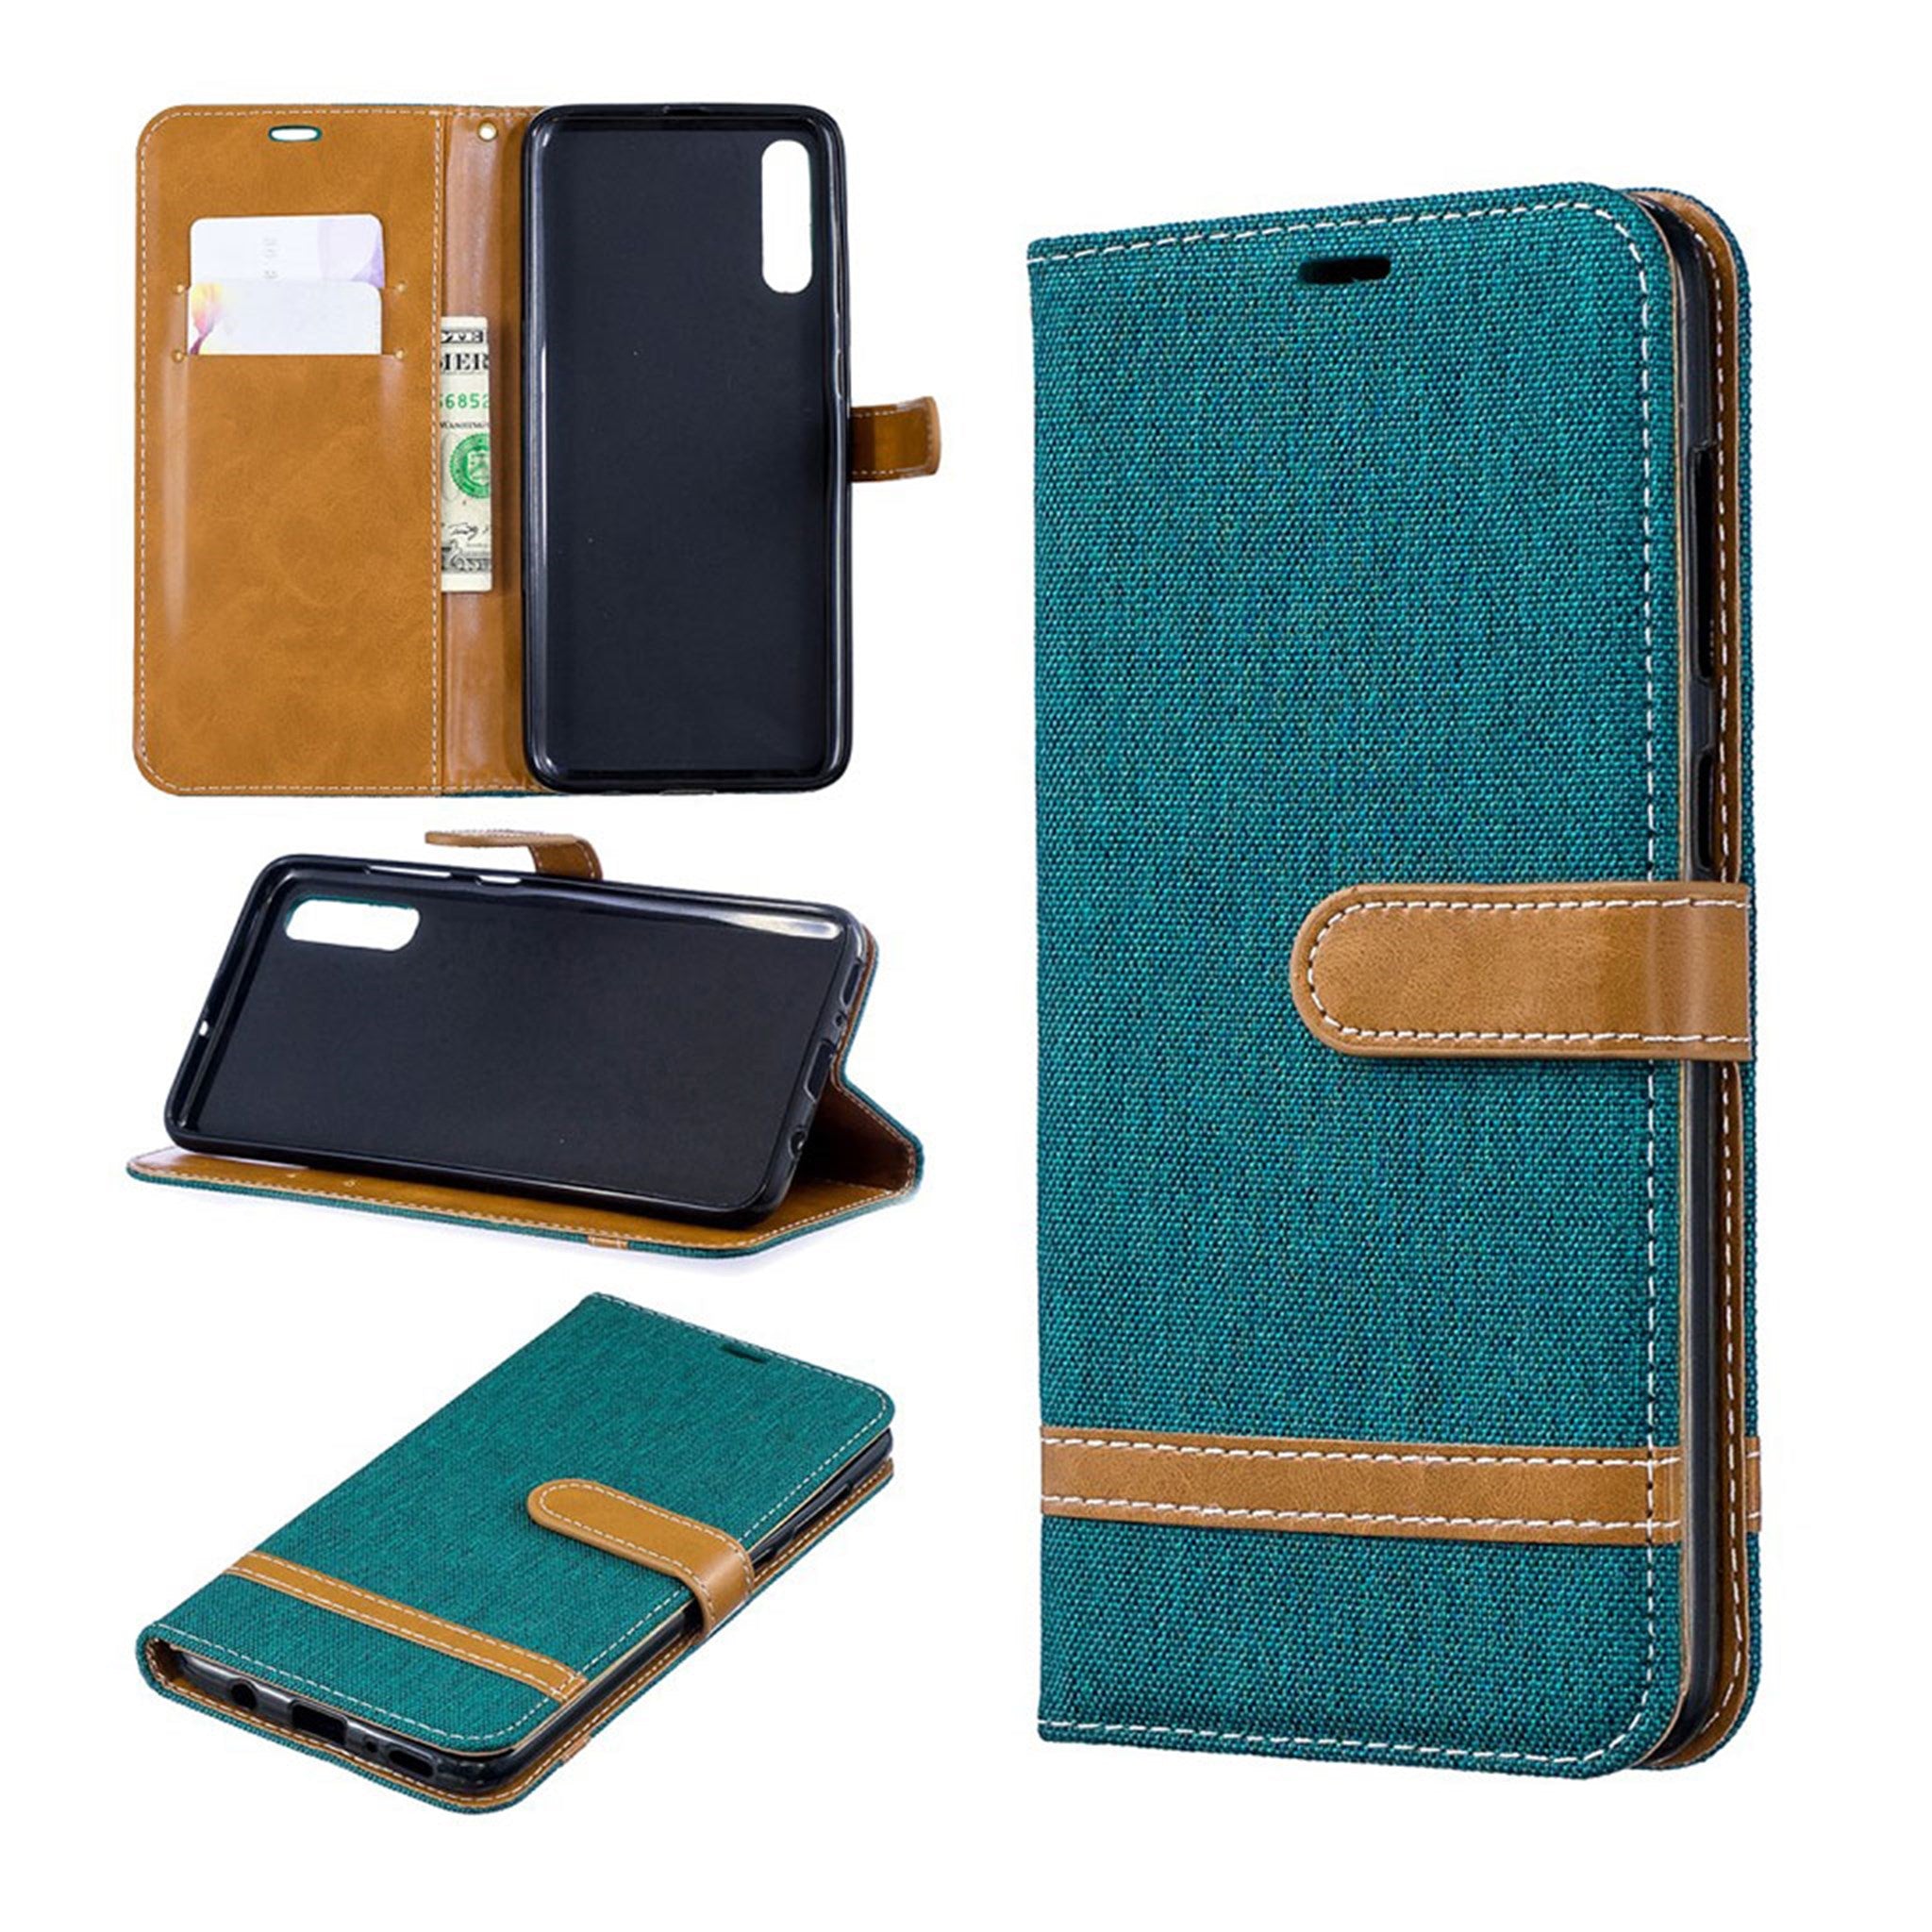 Samsung Galaxy A70 two-tone jeans leather case - Green